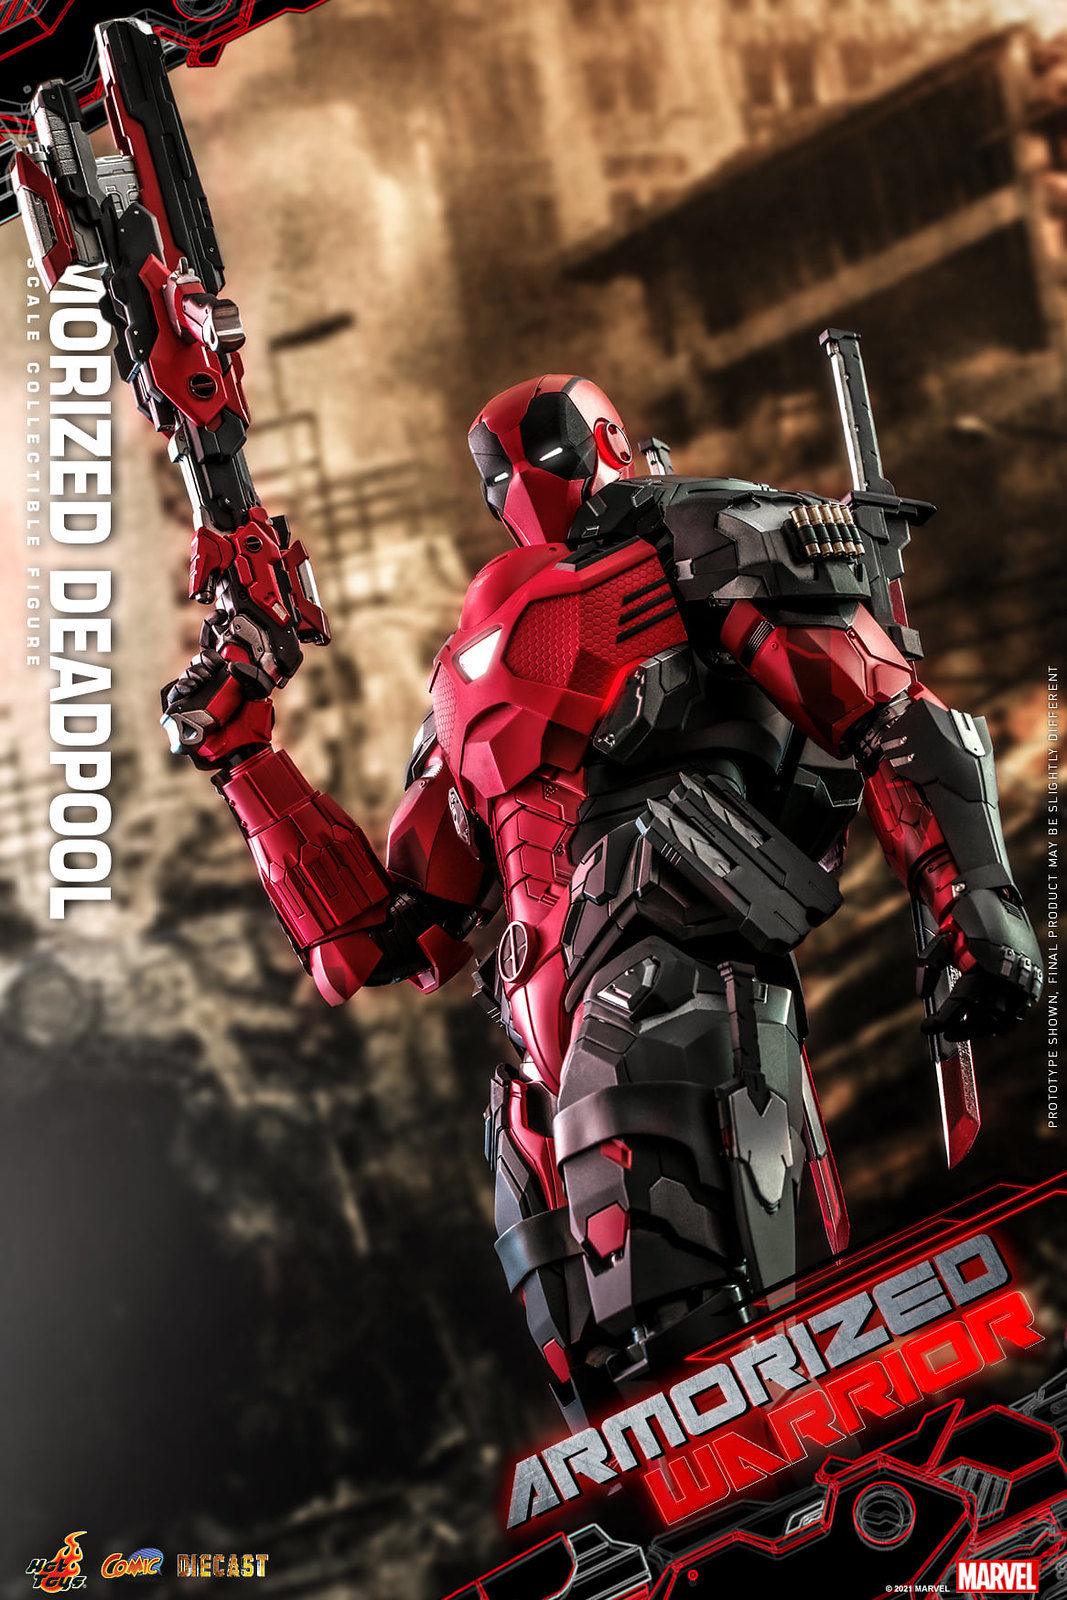 NEW PRODUCT: Hot Toys Armorized Warrior - 1/6th scale Armorized Deadpool Collectible Figure [Armorized Warrior Collection] 51311964784_f6550e0f30_h